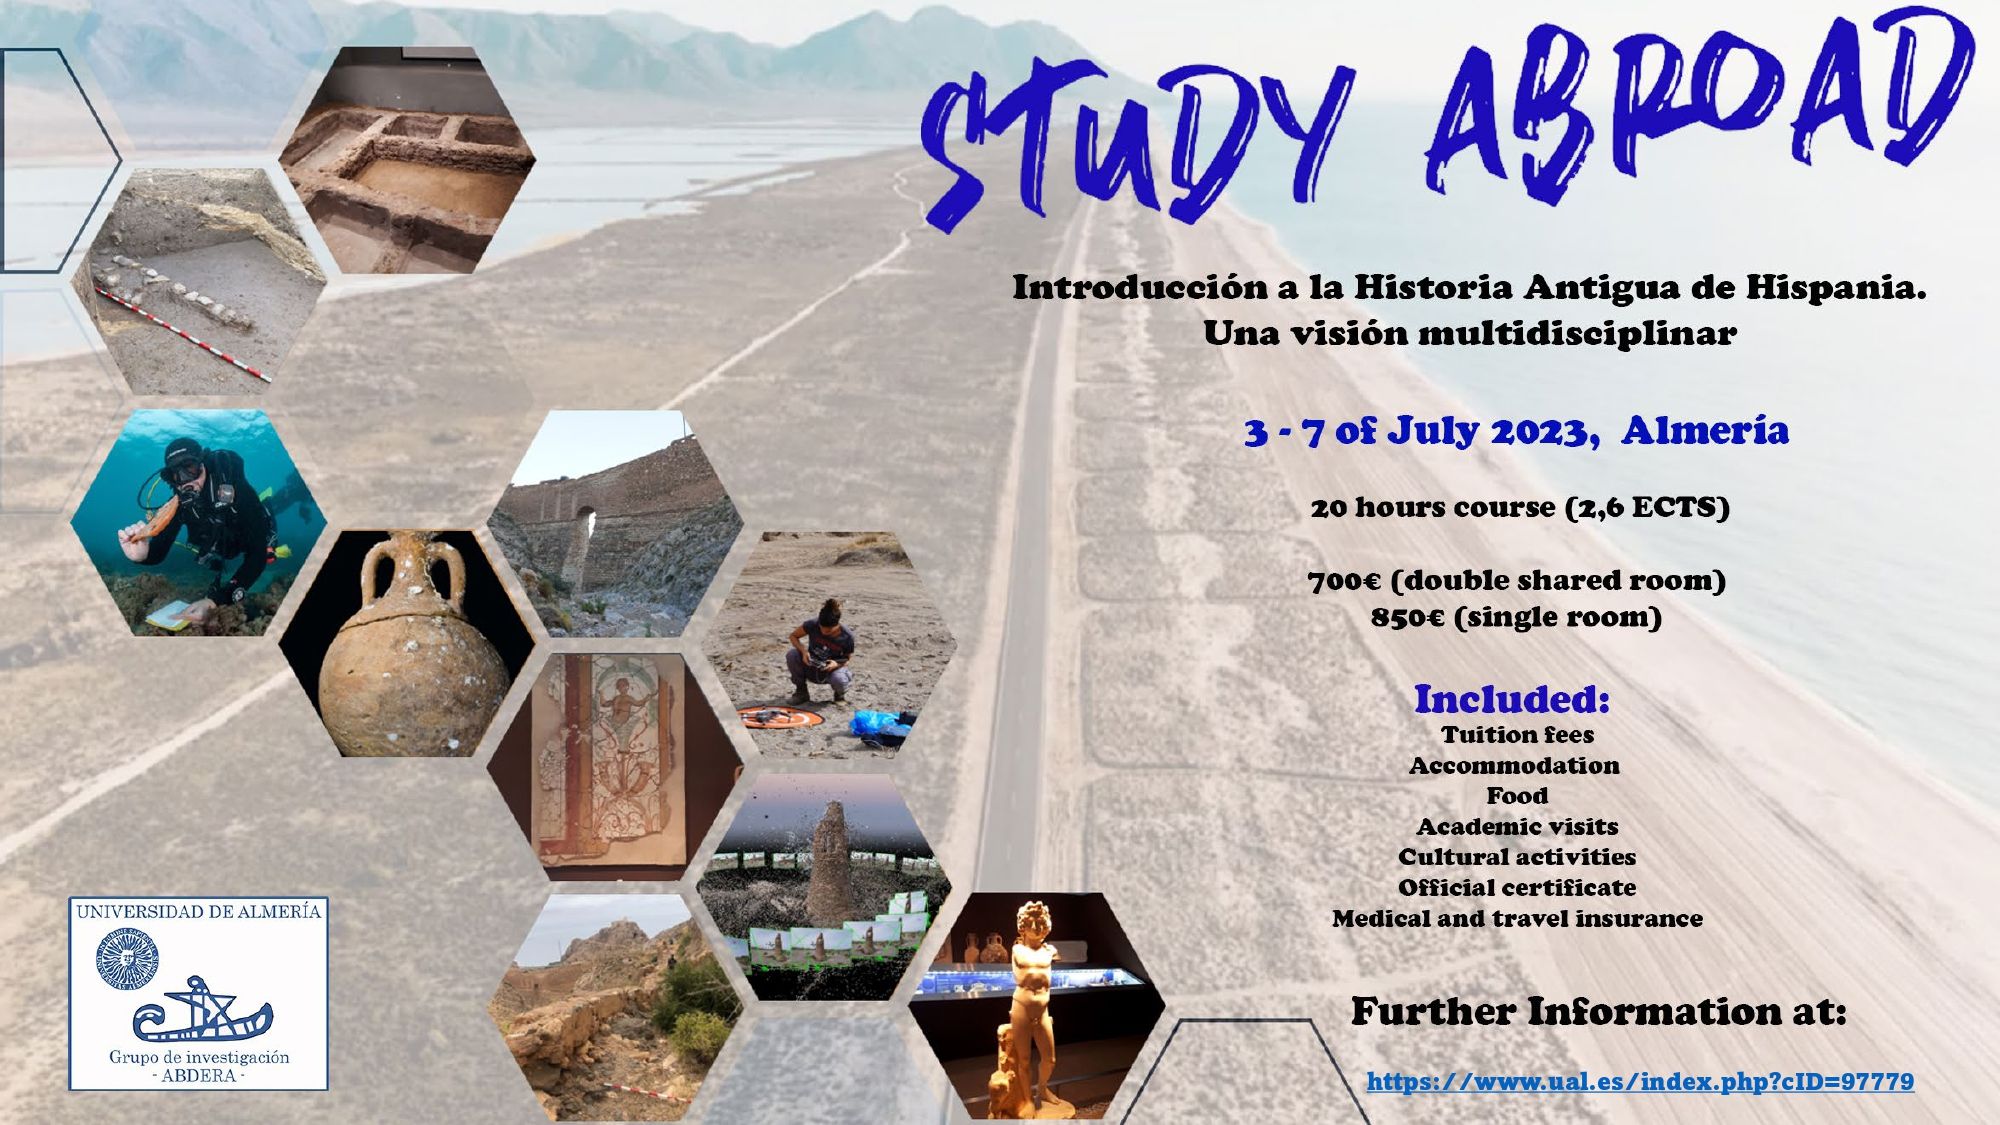 2023-02-14_Antigua_Study Abroad-POSTER-ENG_page-0001.jpg